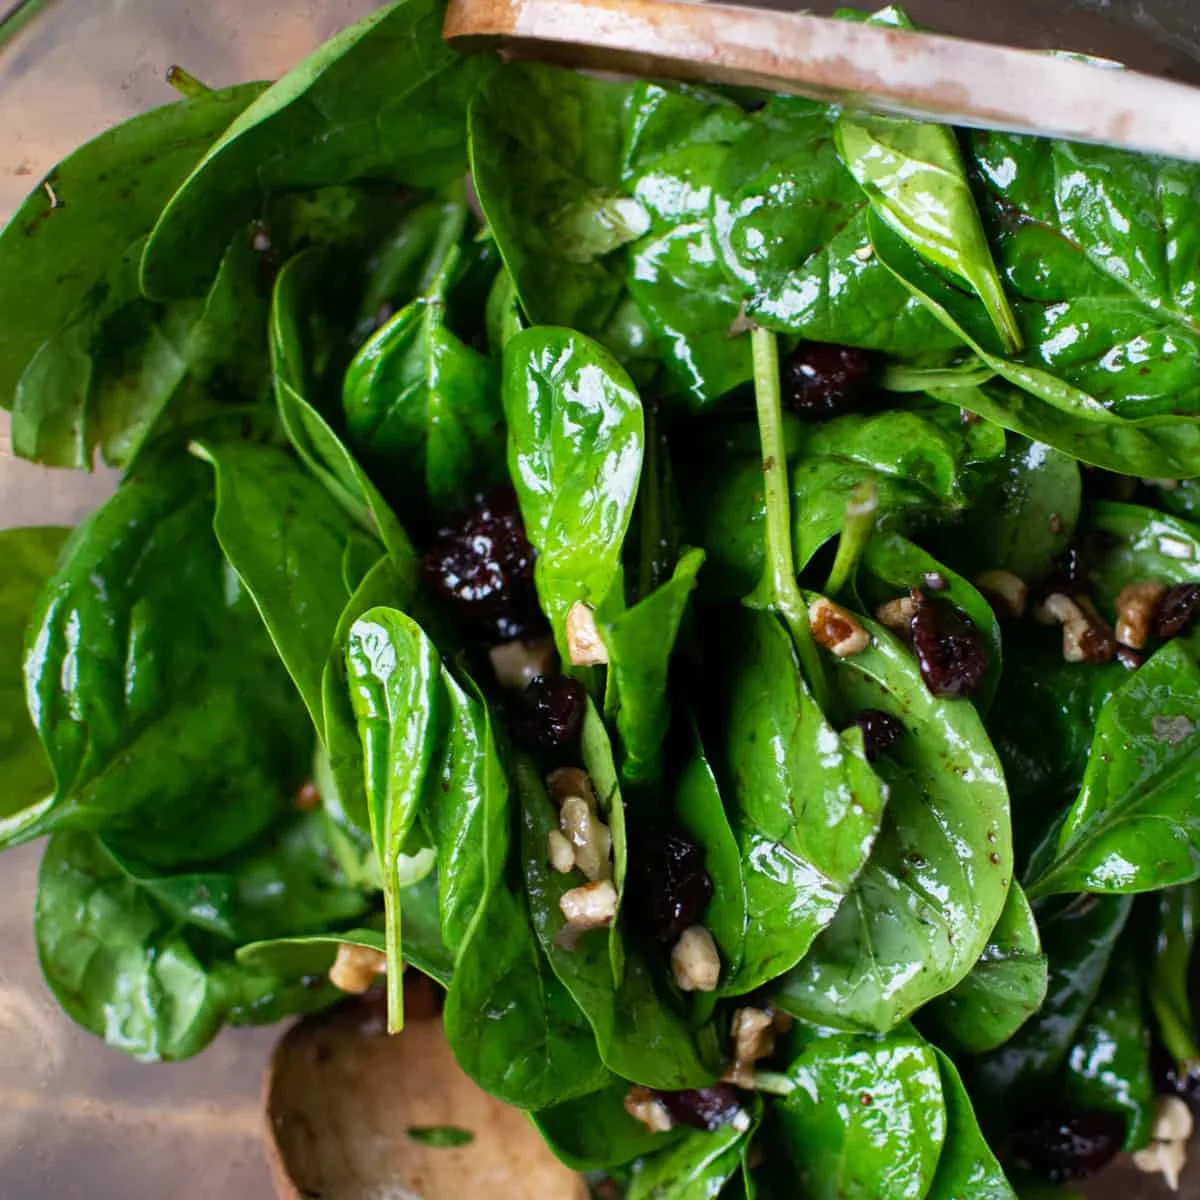 Baby spinach leaves covered in a light dressing.